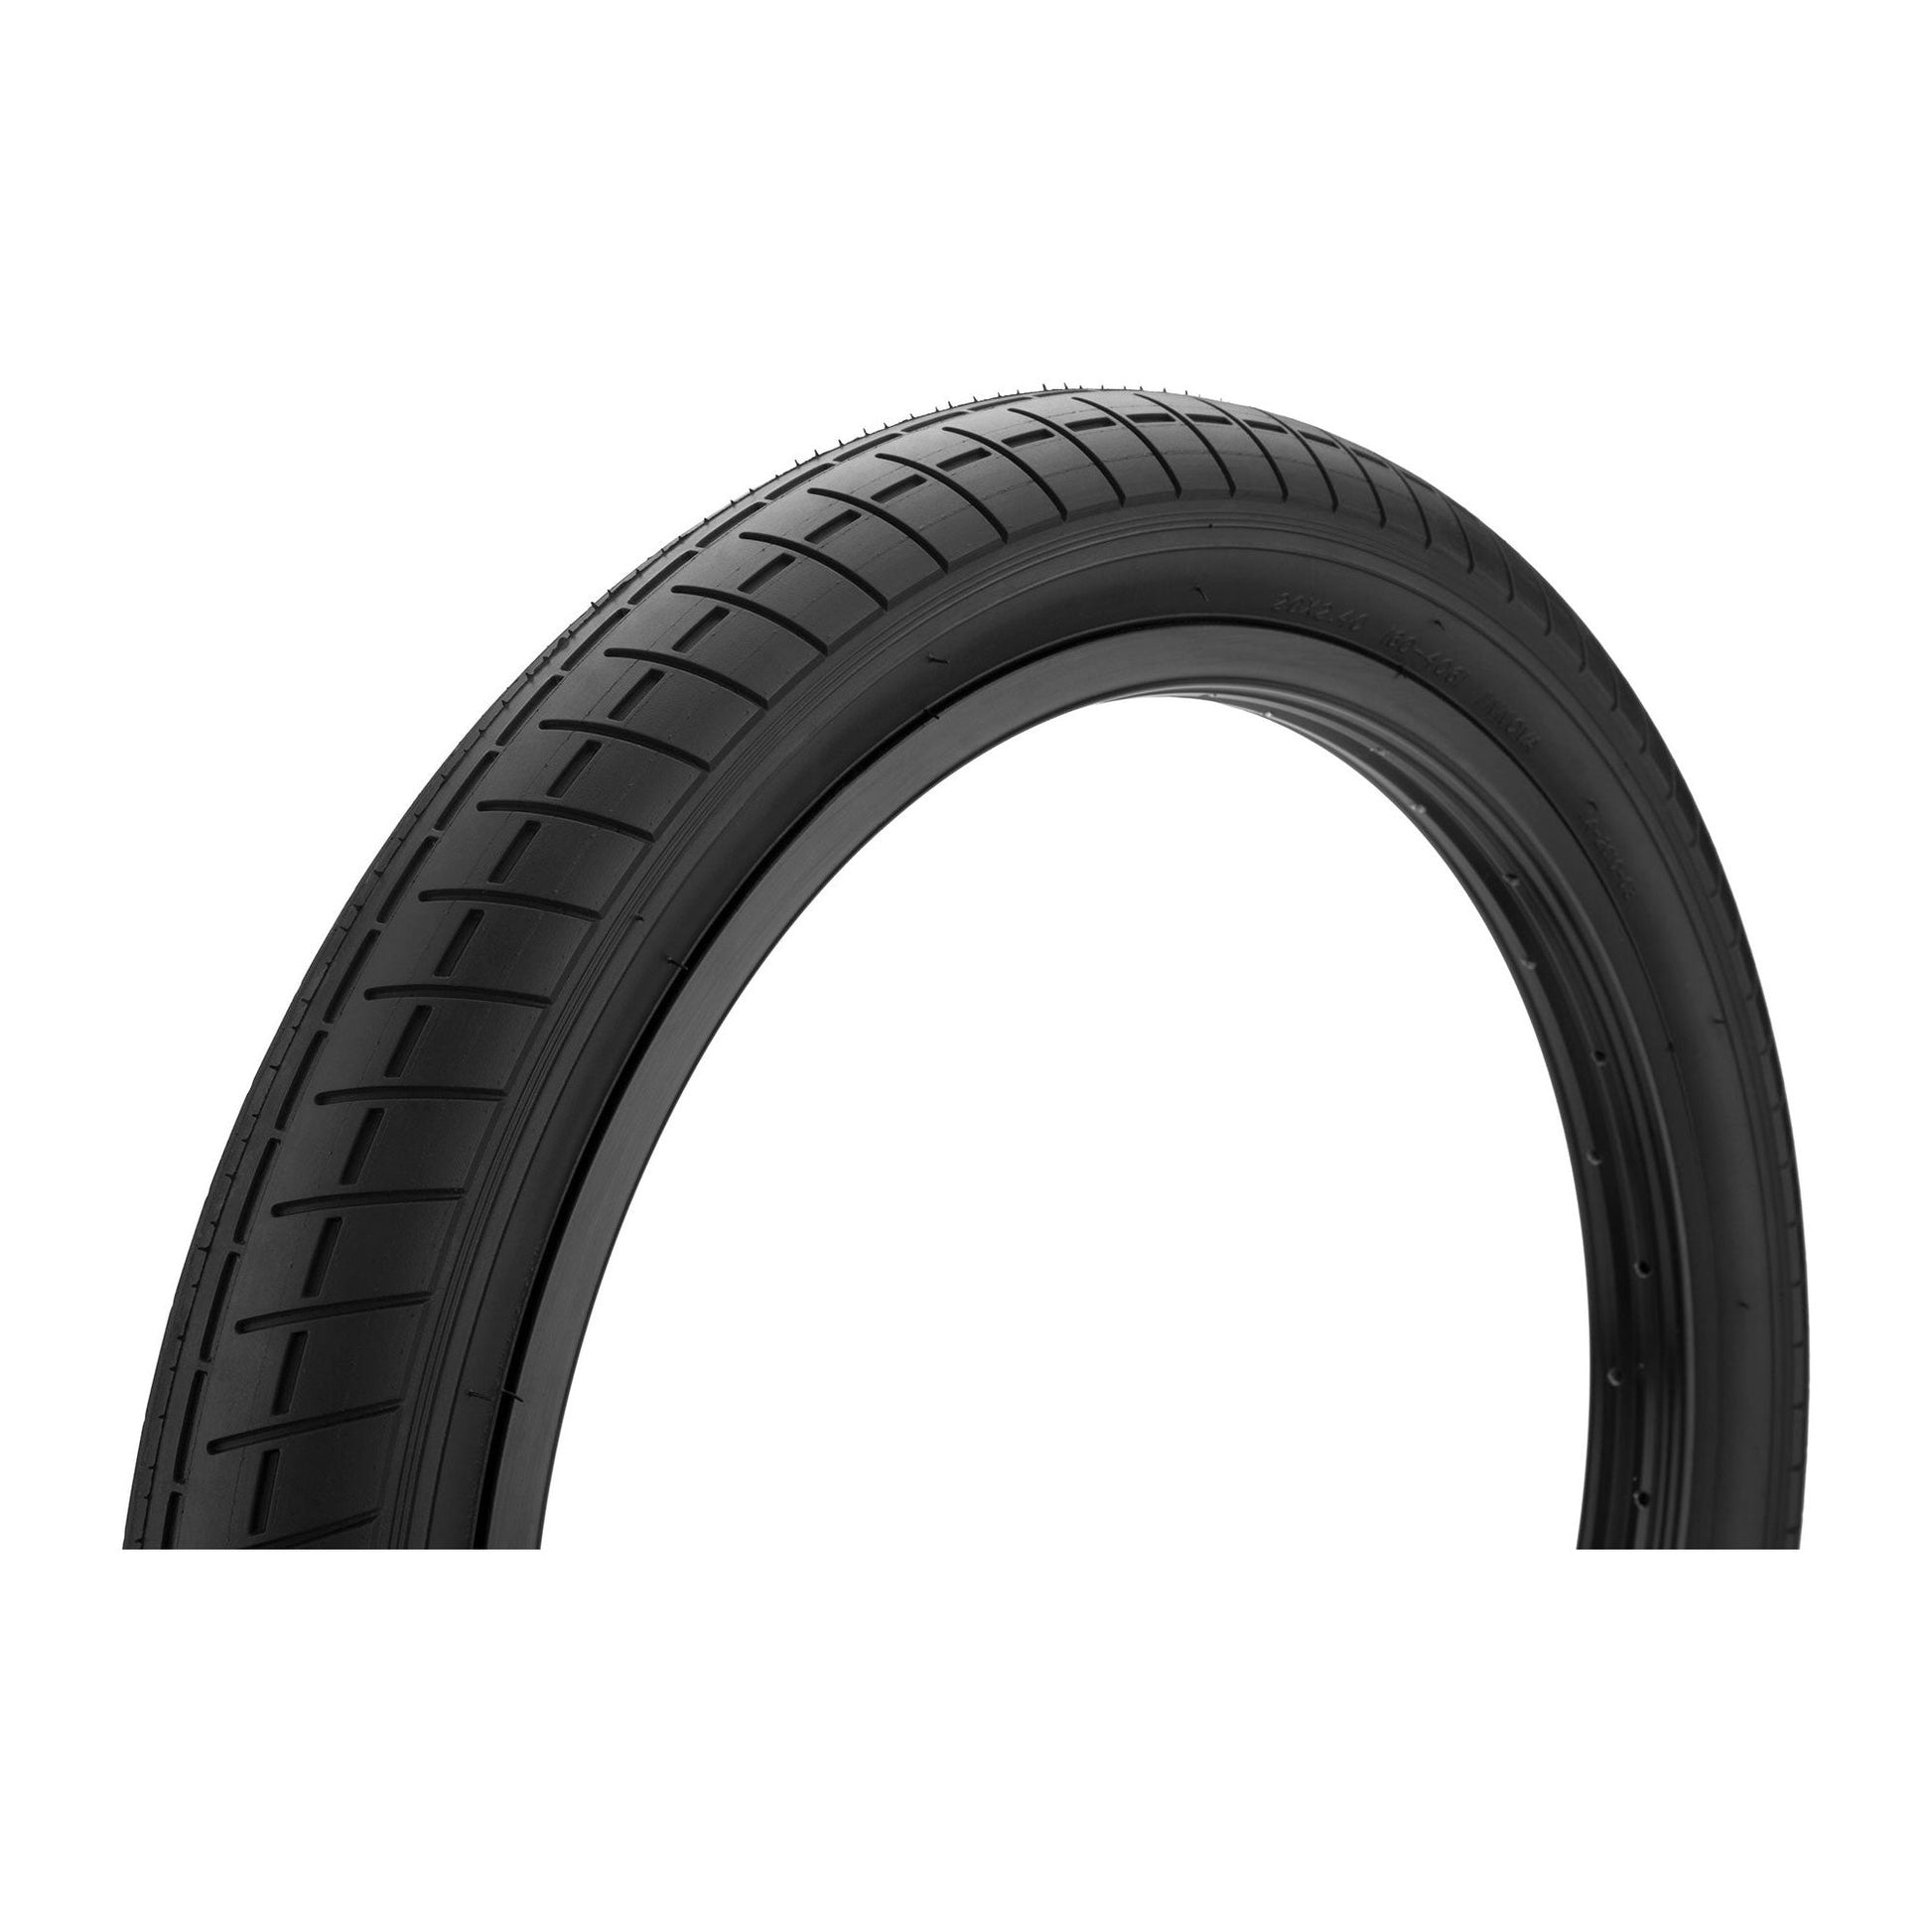 MISSION TRACKER TIRE *PICK UP ONLY - LEGEND BIKES USA